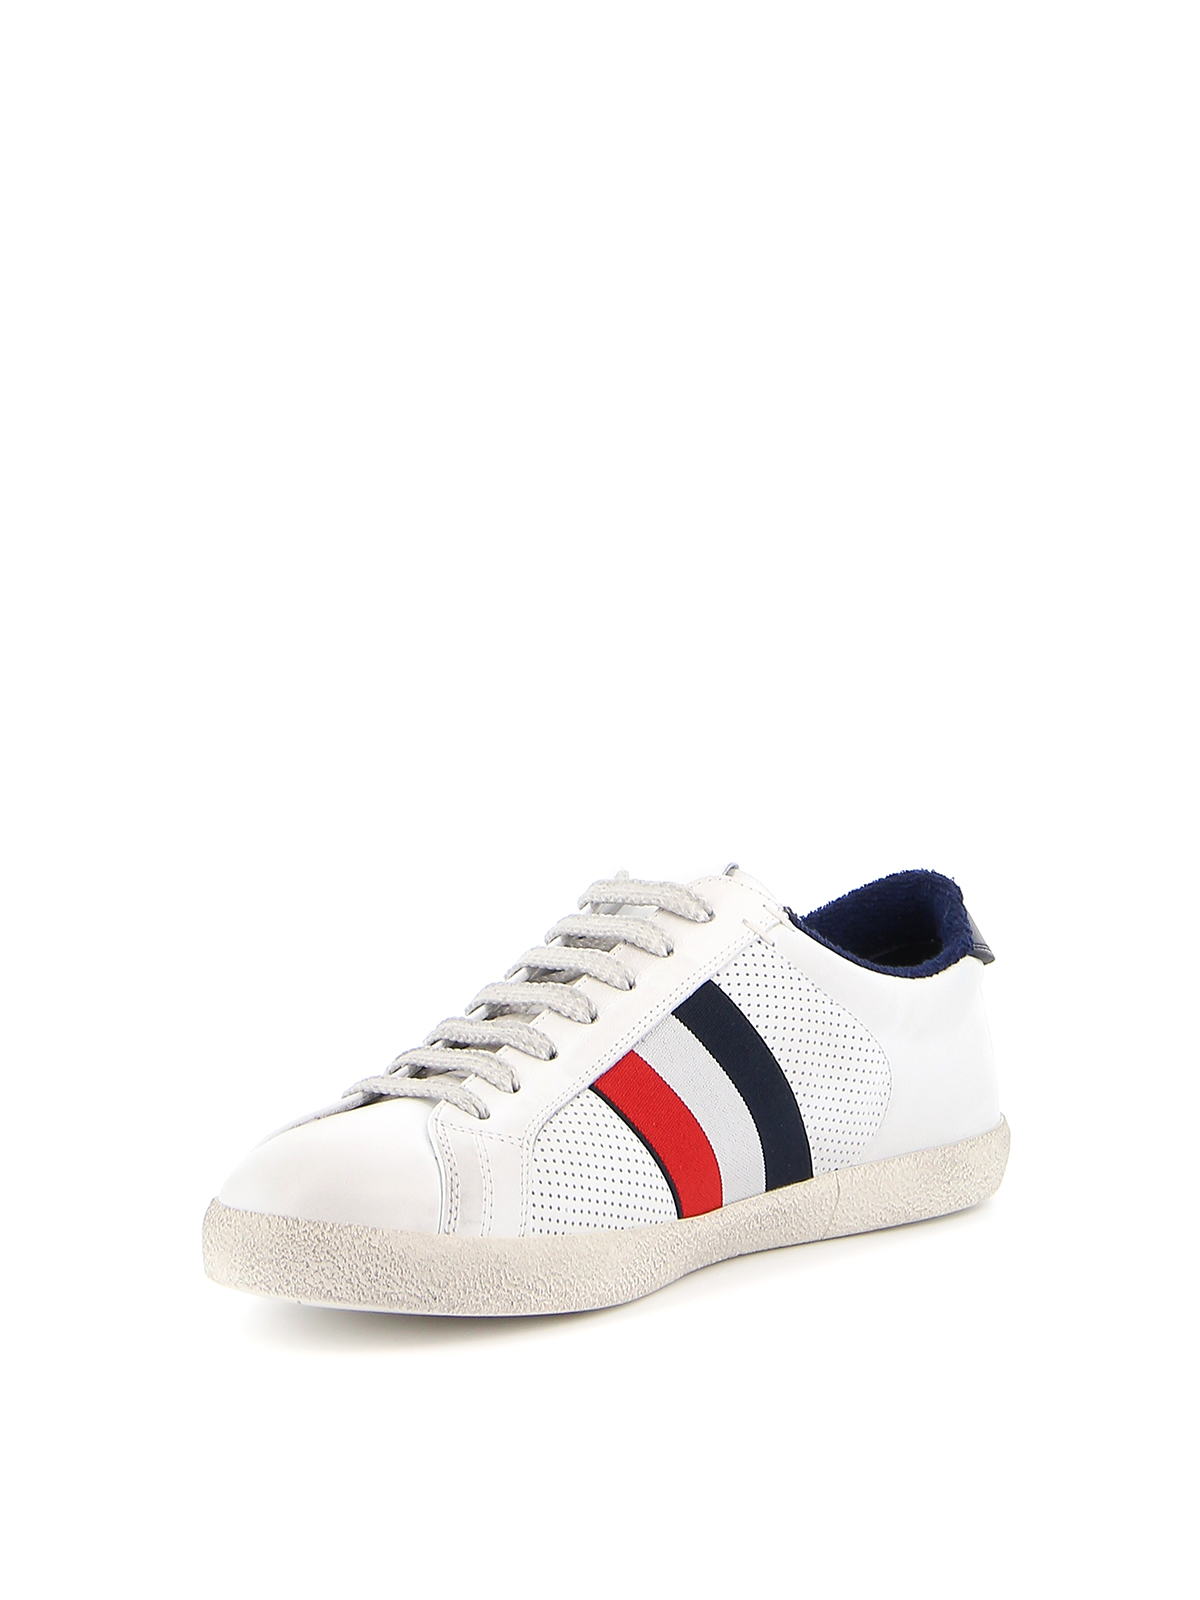 Trainers Moncler - Ryegrass sneakers - 4M7130002S7X032 | iKRIX.com